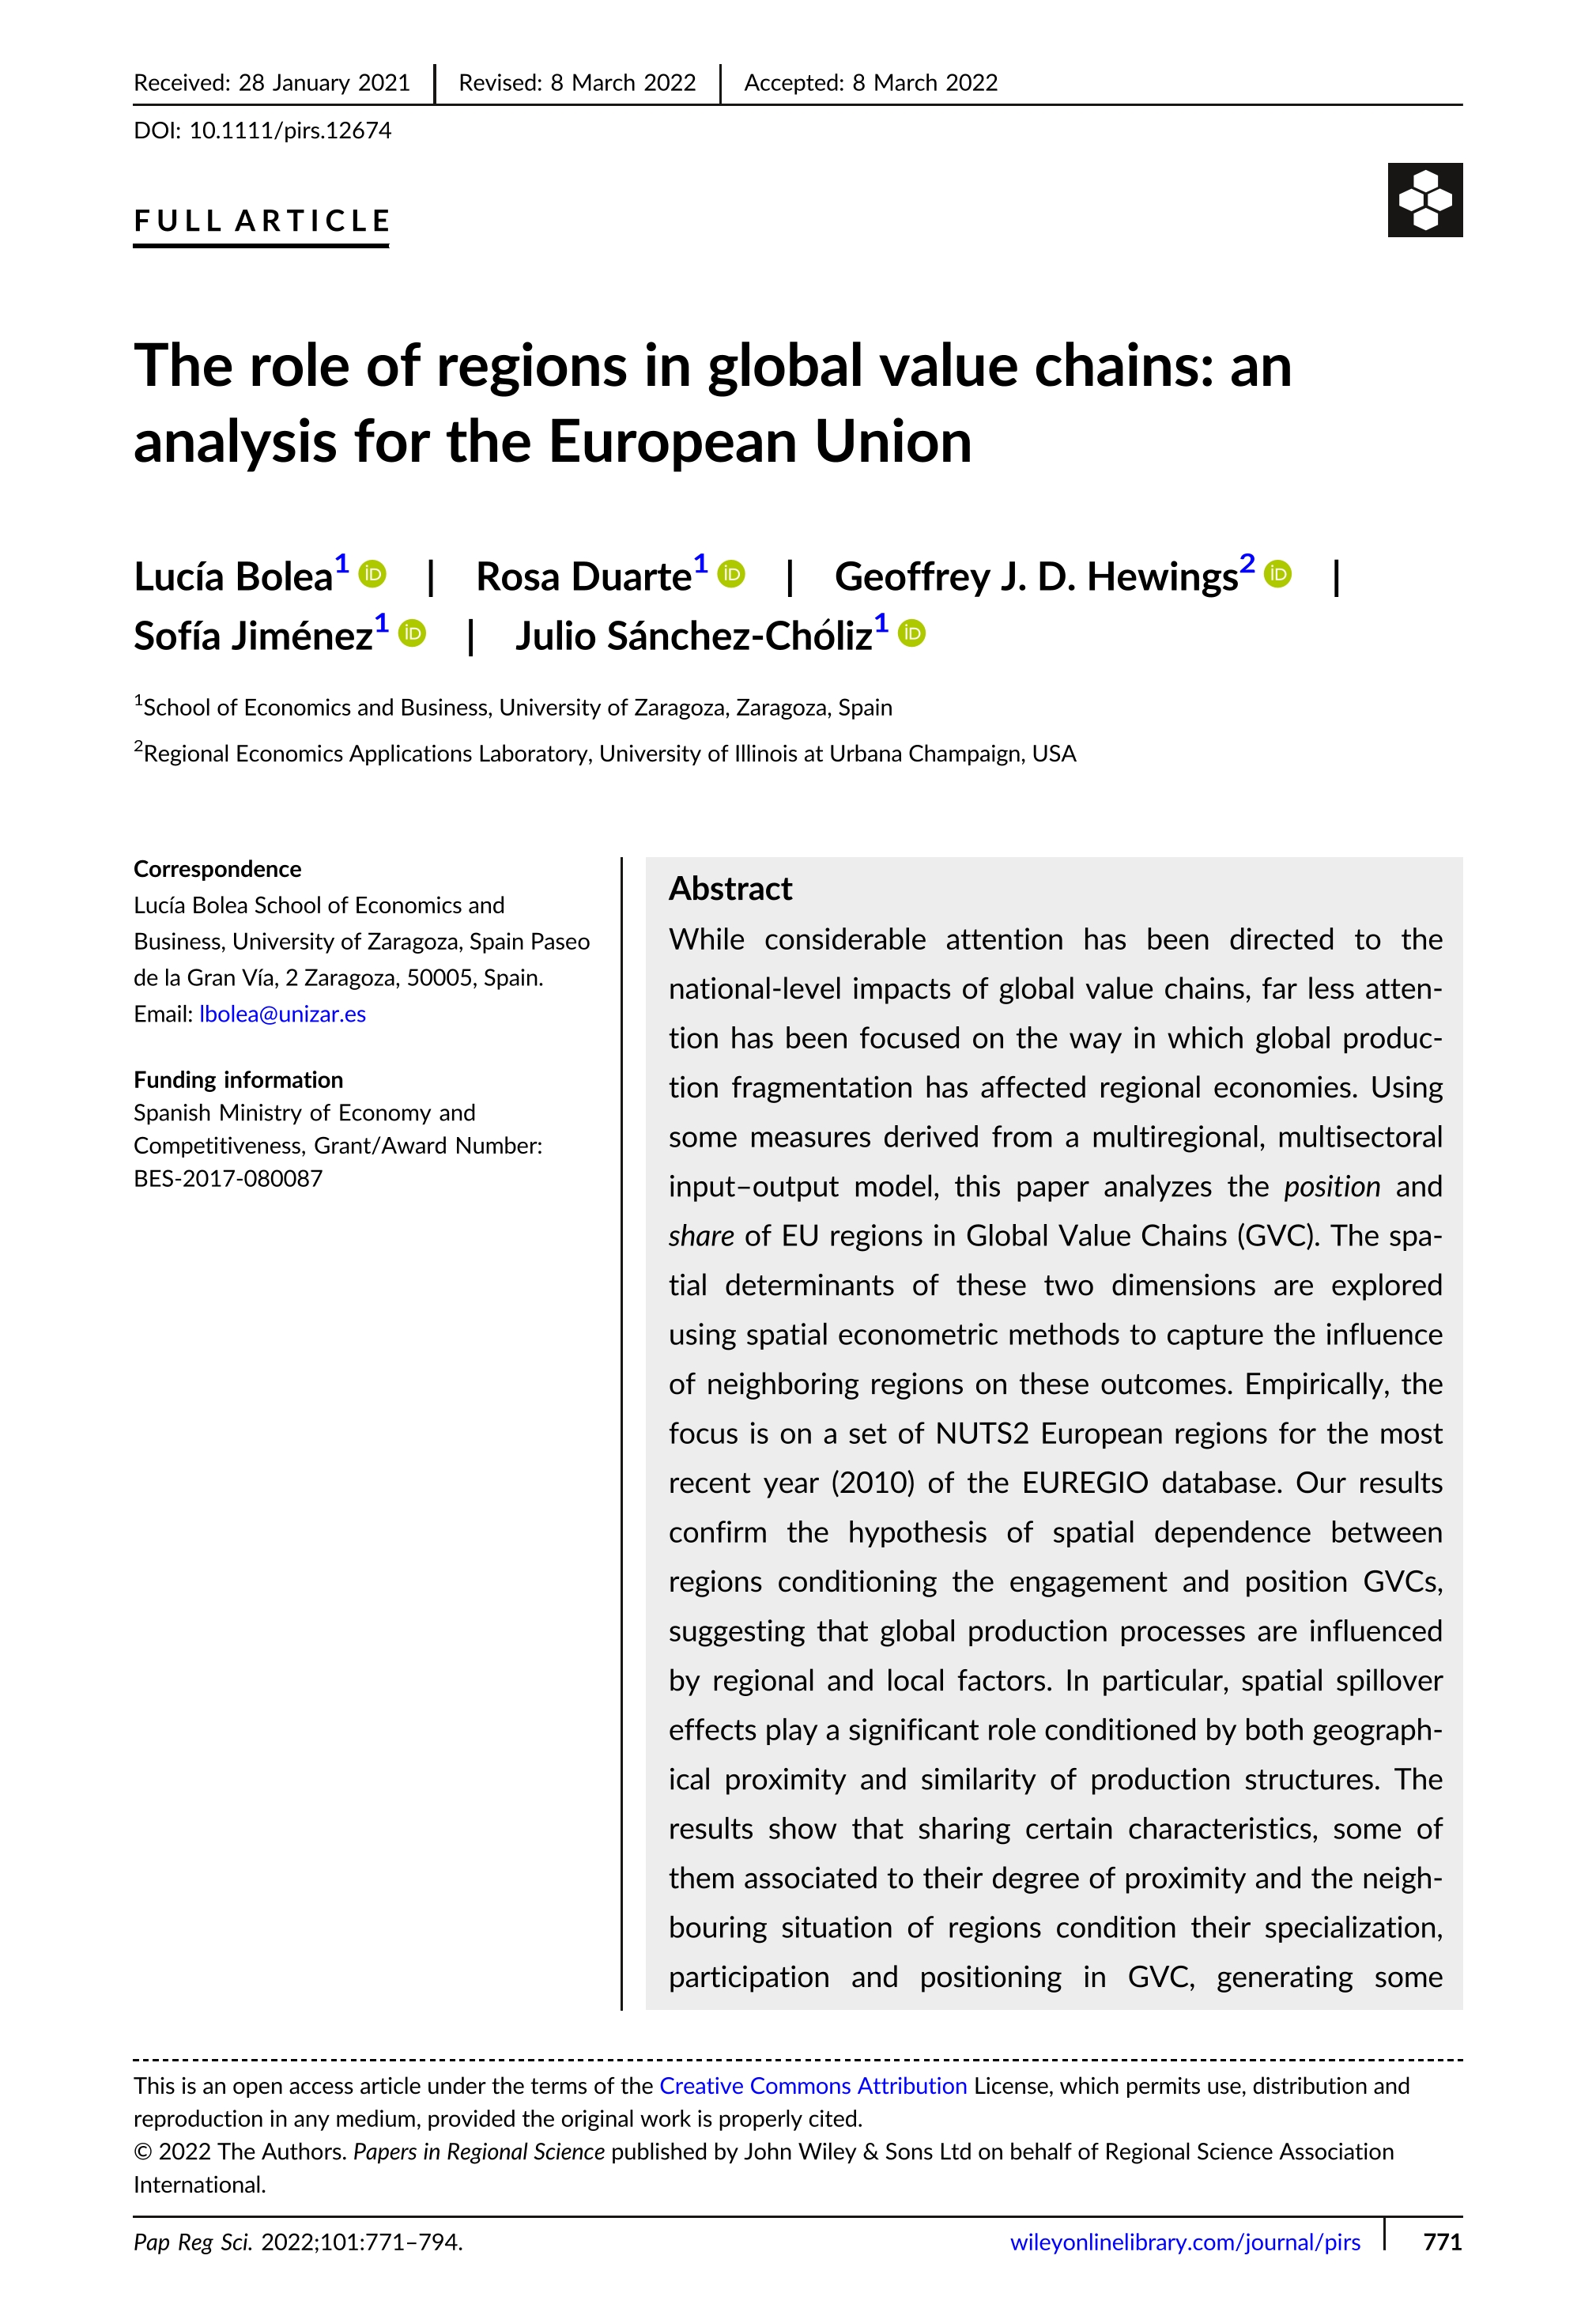 The role of regions in global value chains: an analysis for the European Union